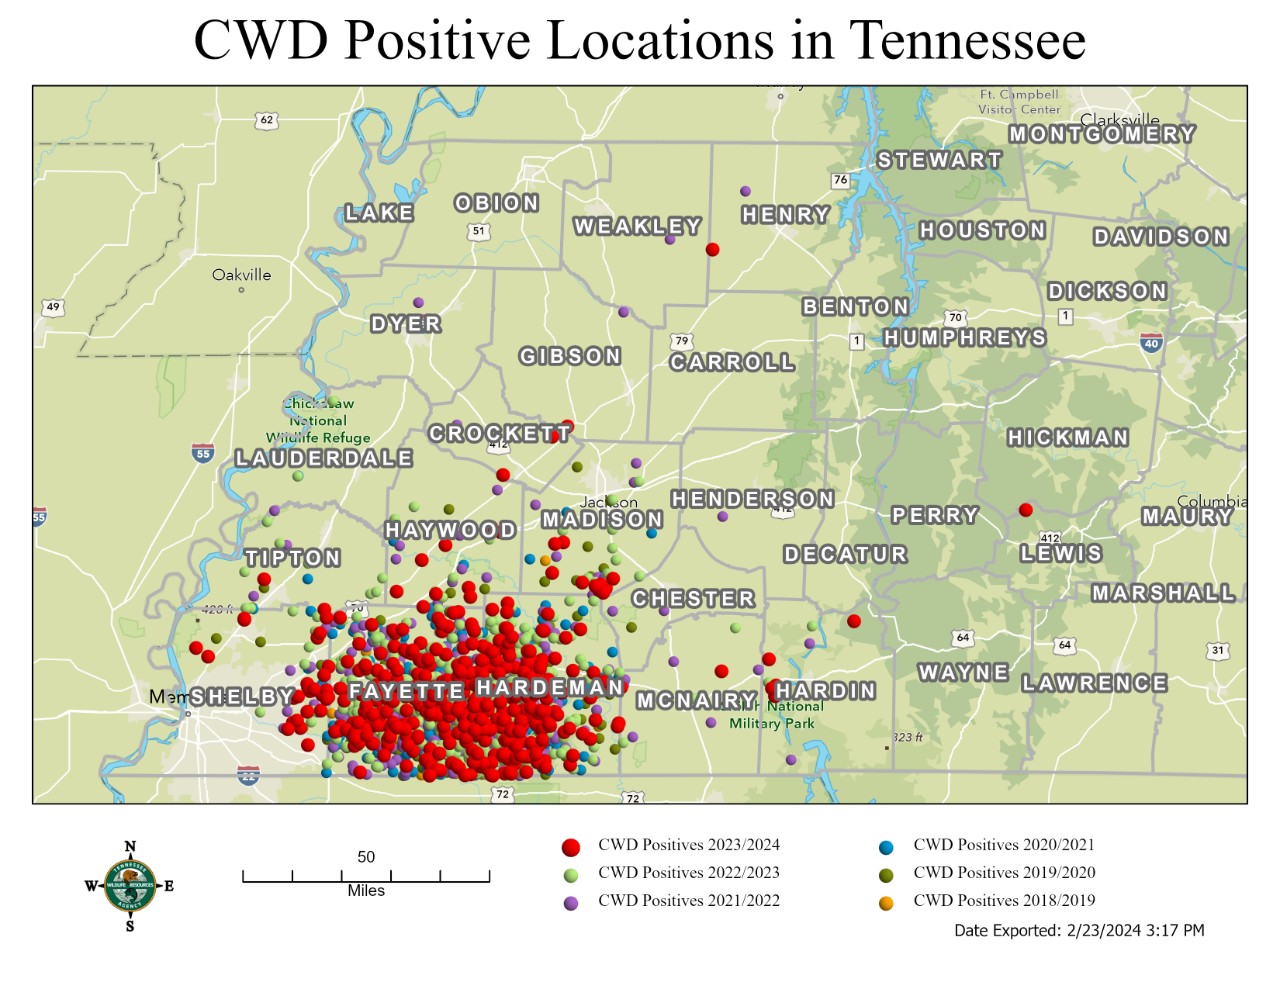 CWD Positive Counties